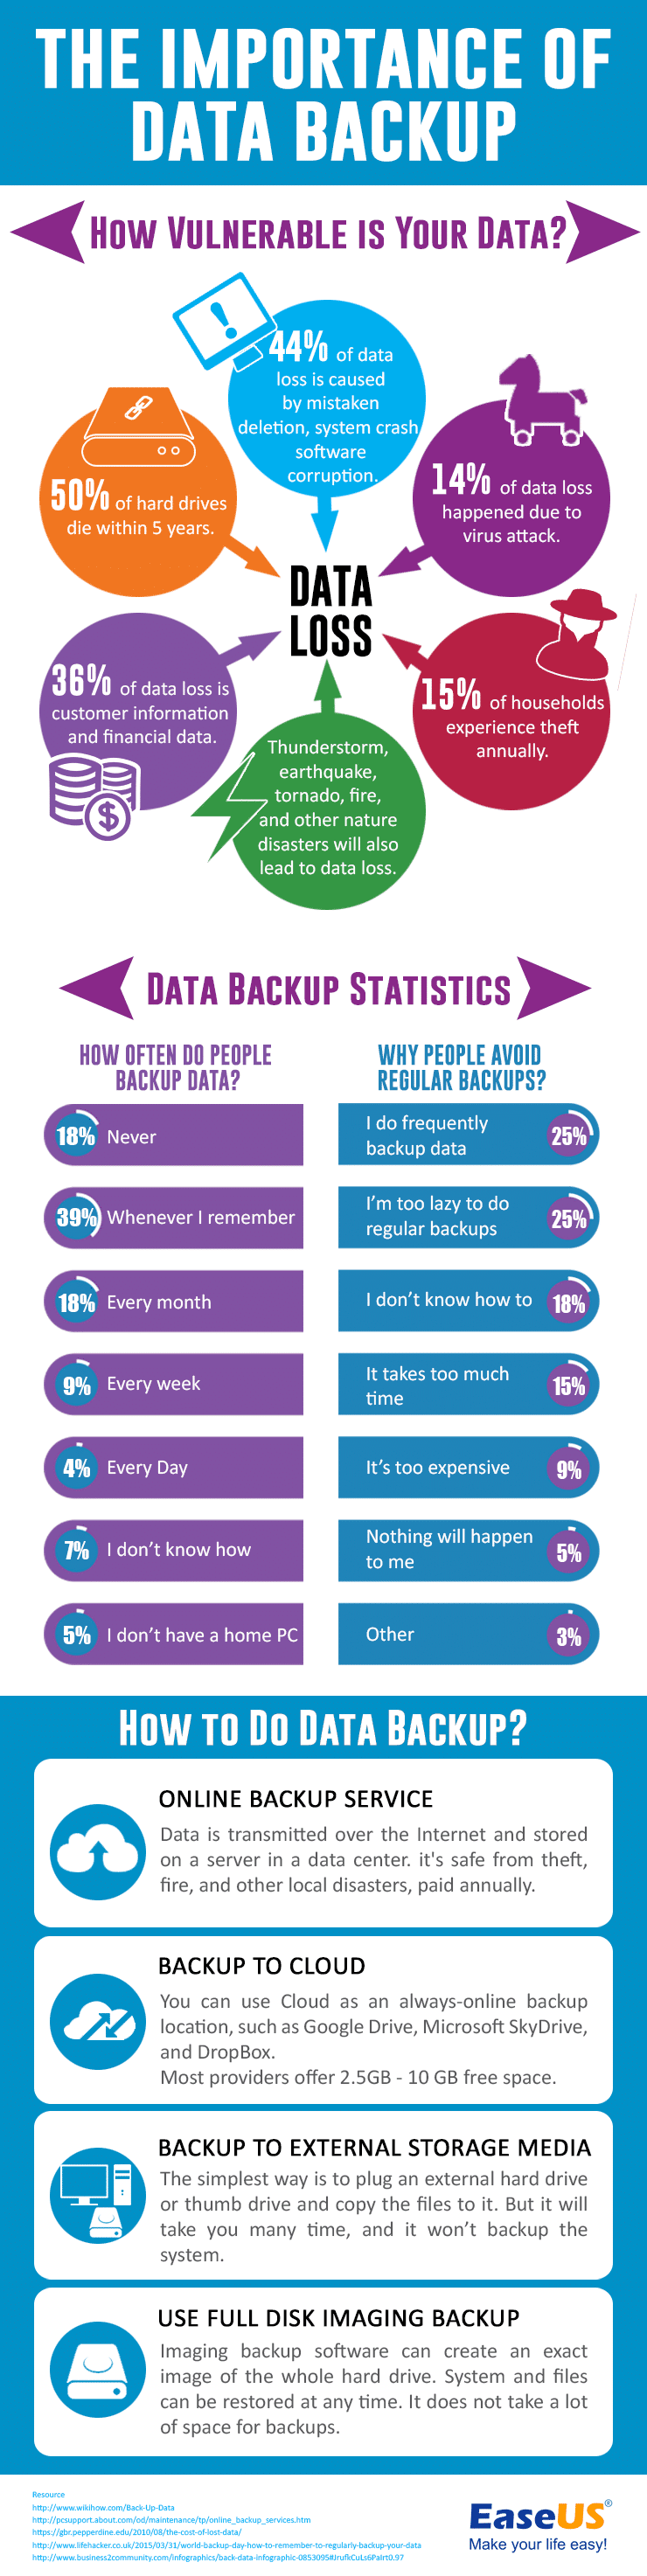 The Importance Of Data Backup [Infographic]